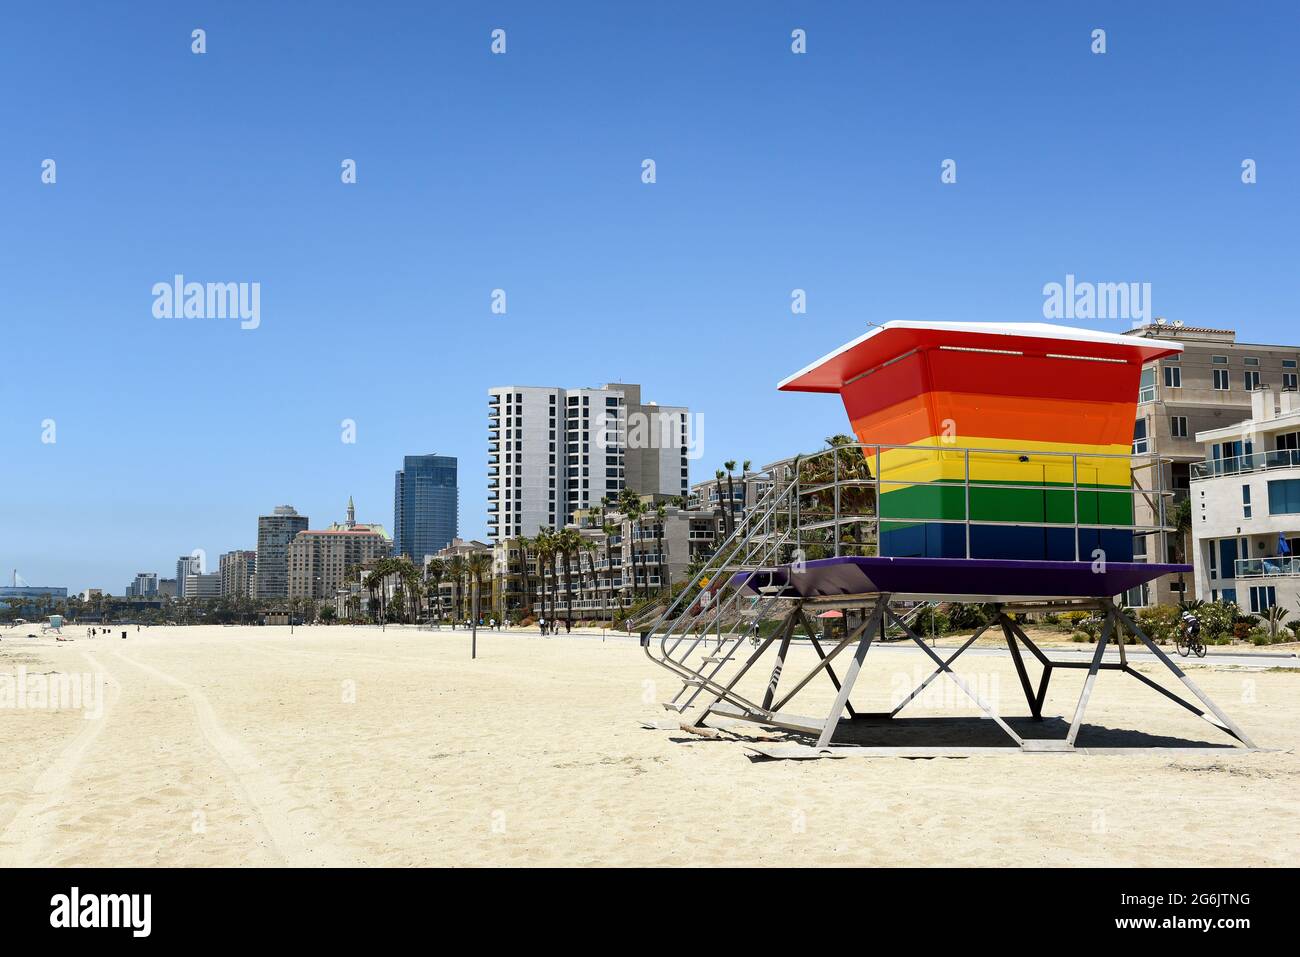 LONG BEACH, CALIF - 5 JUL 2021: Pride Tower, at Shoreline Way and 12th Pl, with the city skyline in the background. The rainbow-colored lifeguard towe Stock Photo